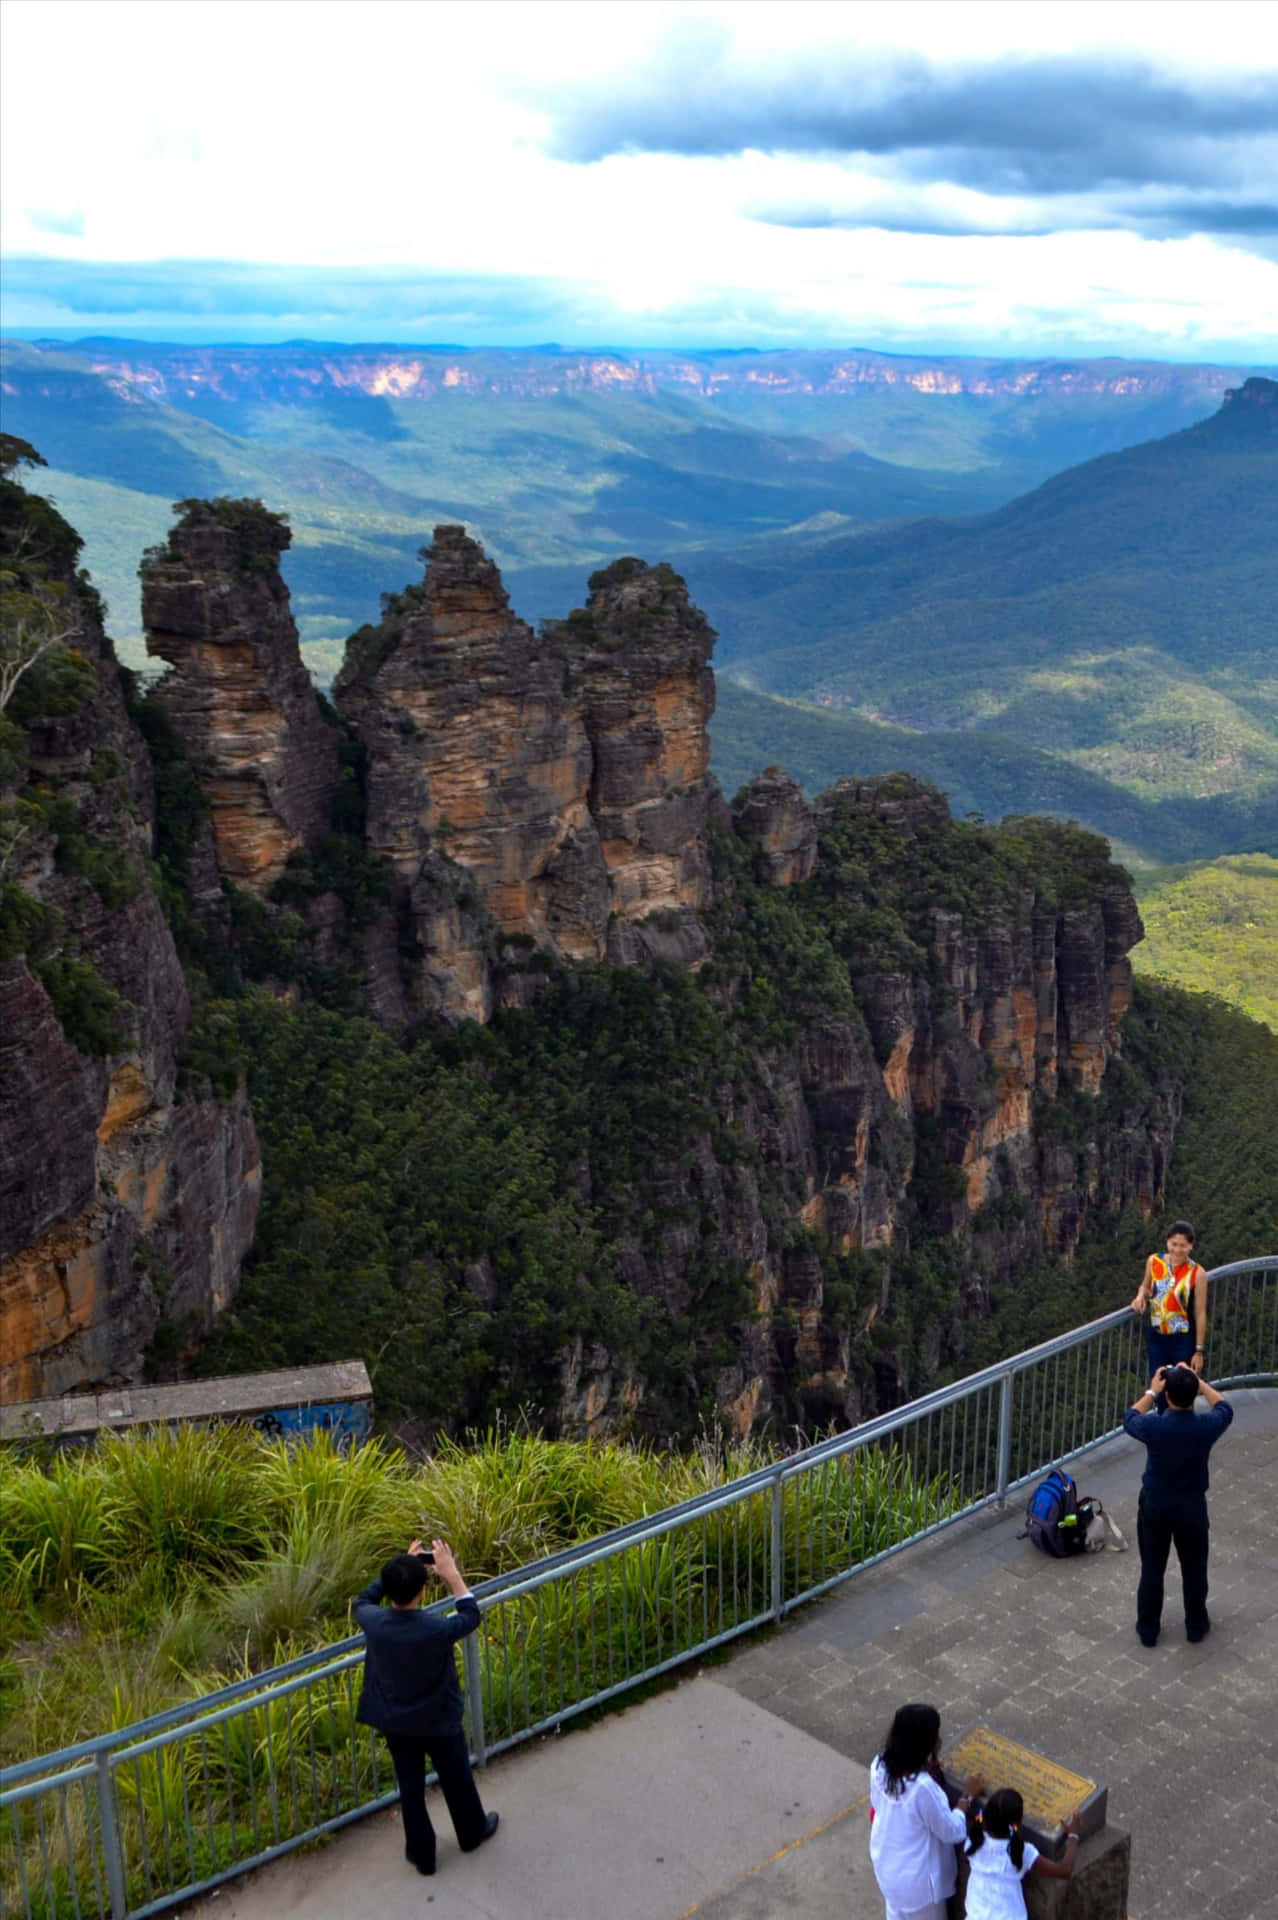 Exhale and enjoy the mesmerizing view of the beautiful Blue Mountains National Park. Wallpaper